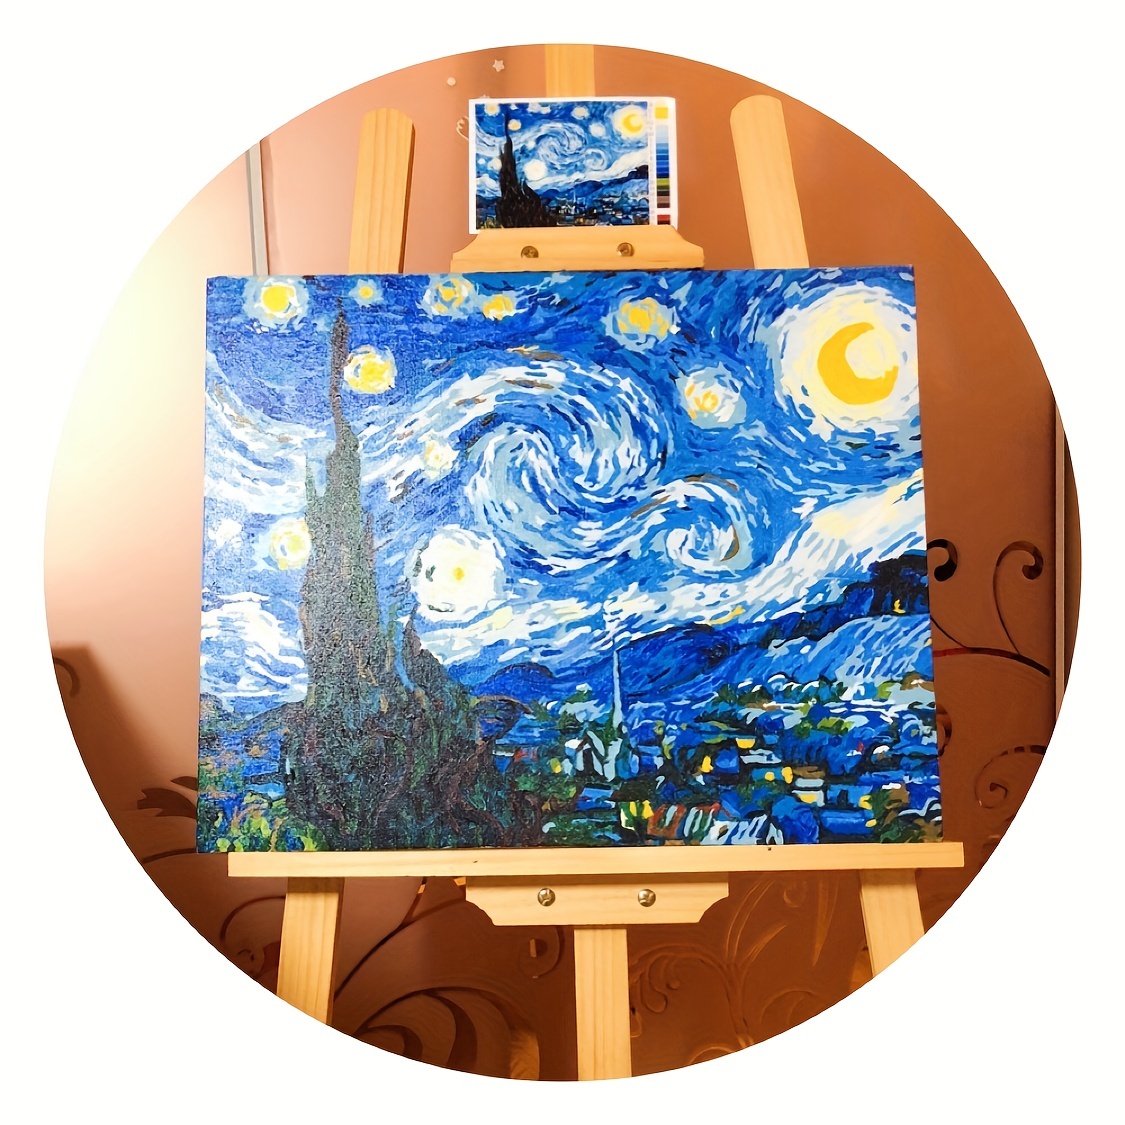 BANLANA Paint by Numbers for Adults, DIY Adult Paint by Number Kits for  Beginners on Canvas Rolled 16 by 20 (Van Gogh The Starry Night)